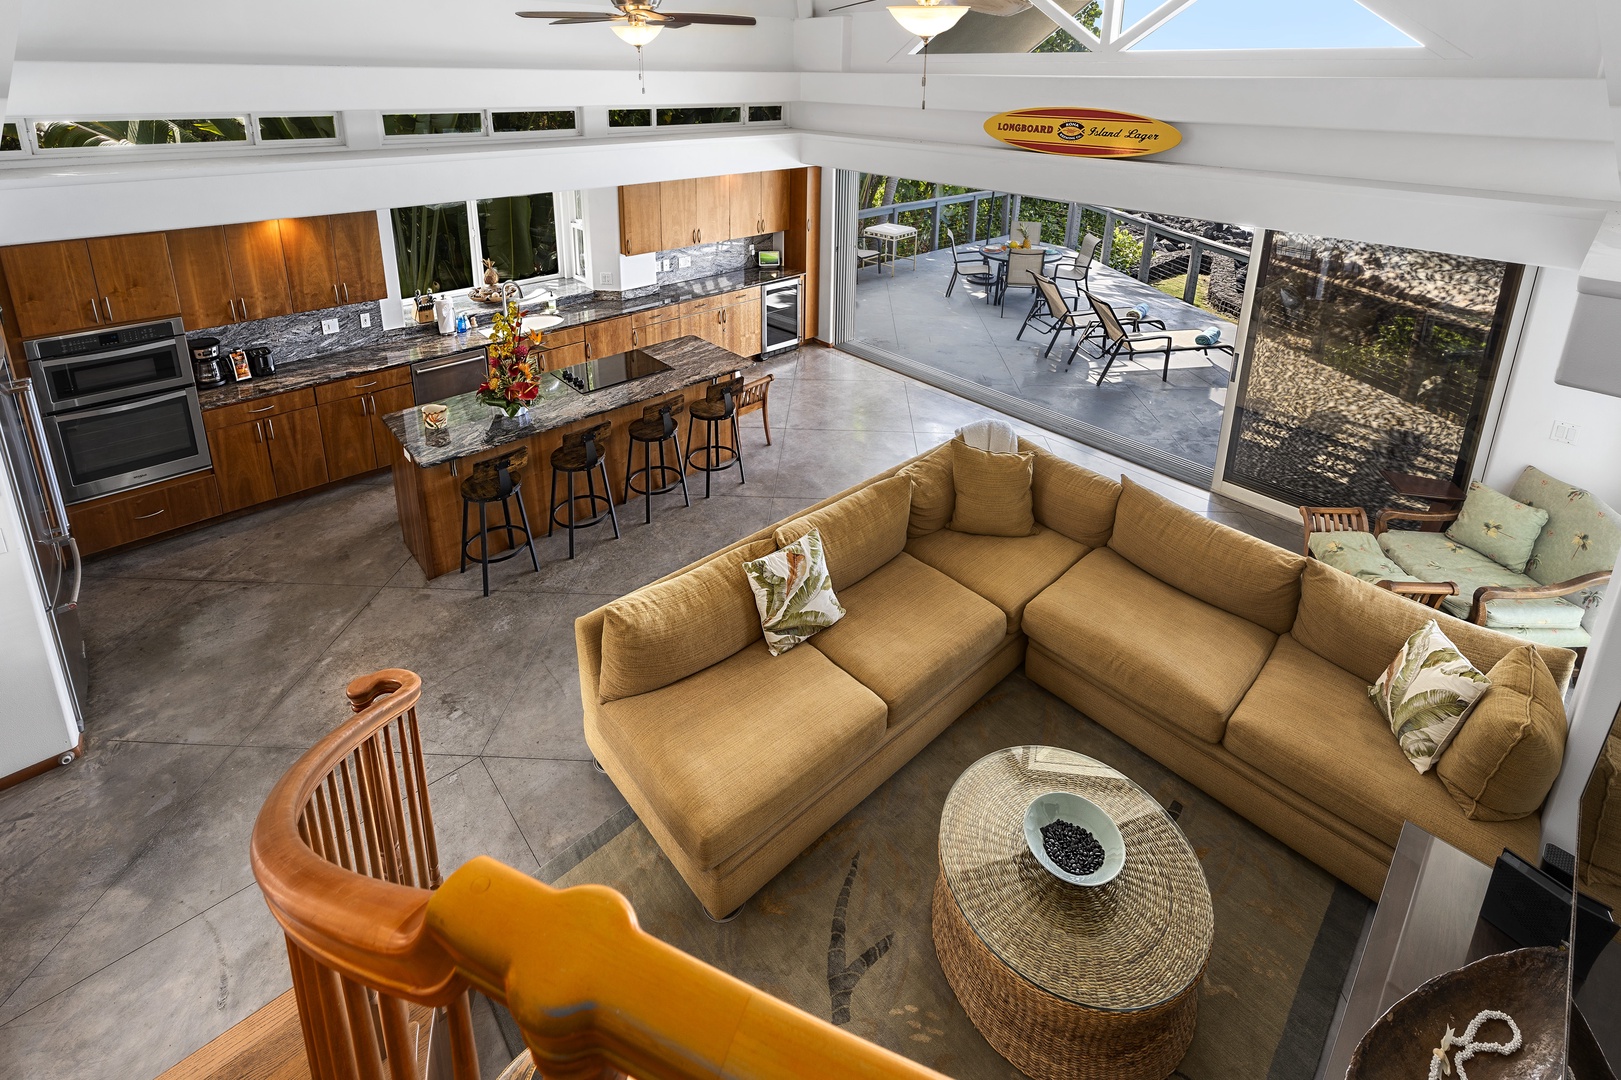 Kailua-Kona Vacation Rentals, Hale Kope Kai - View of the Living area from the top of the stairs